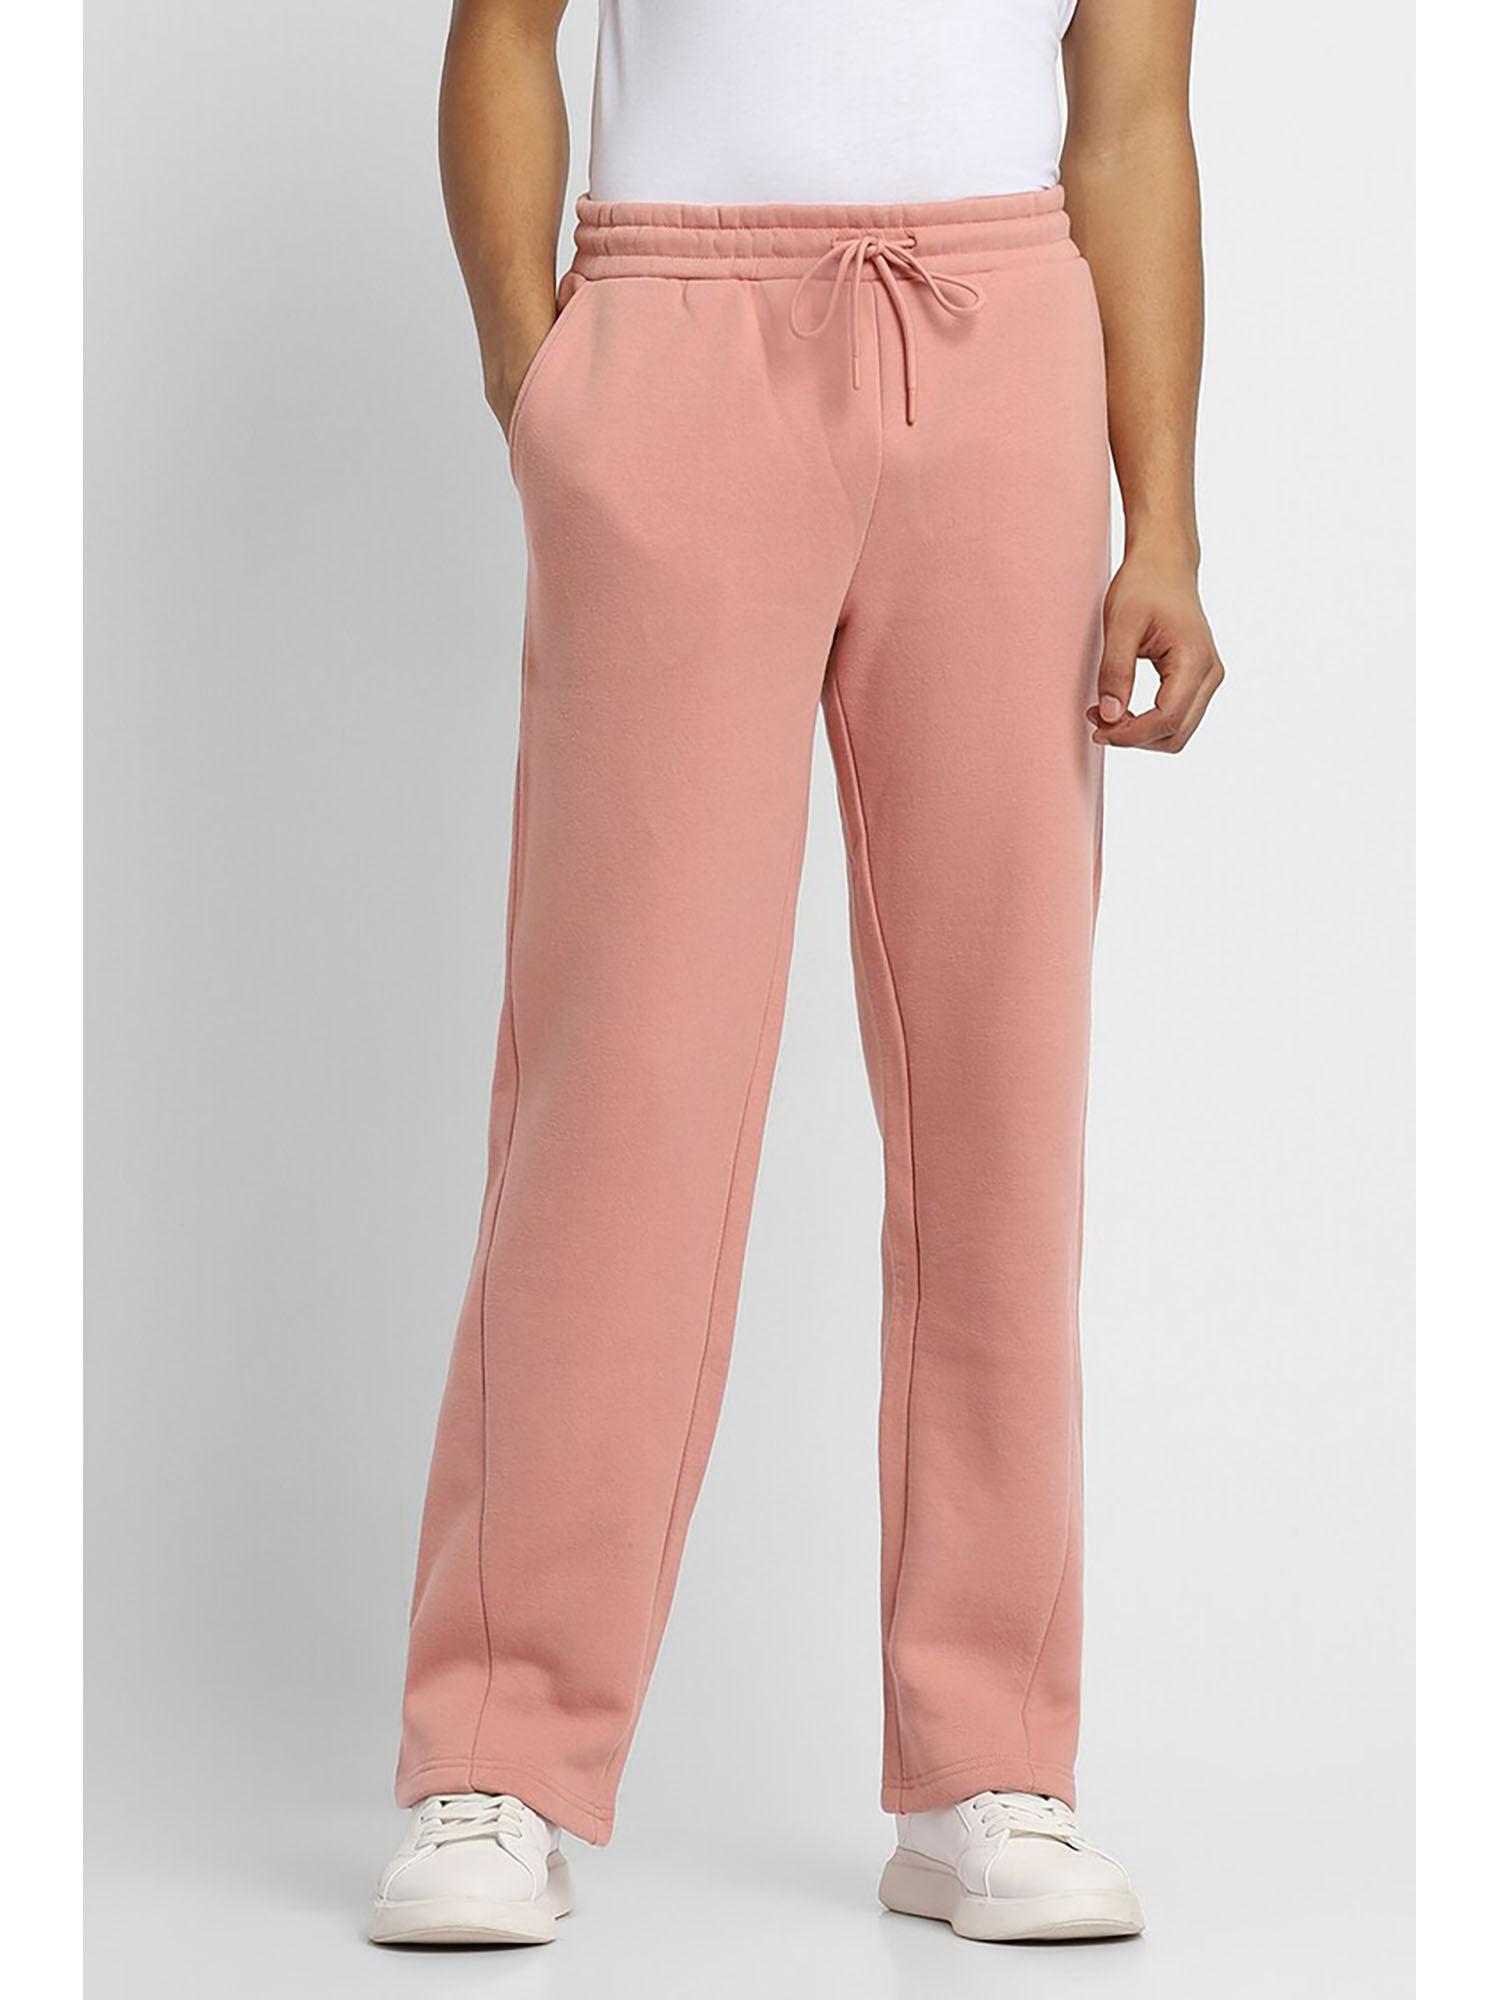 solid pink trackpants